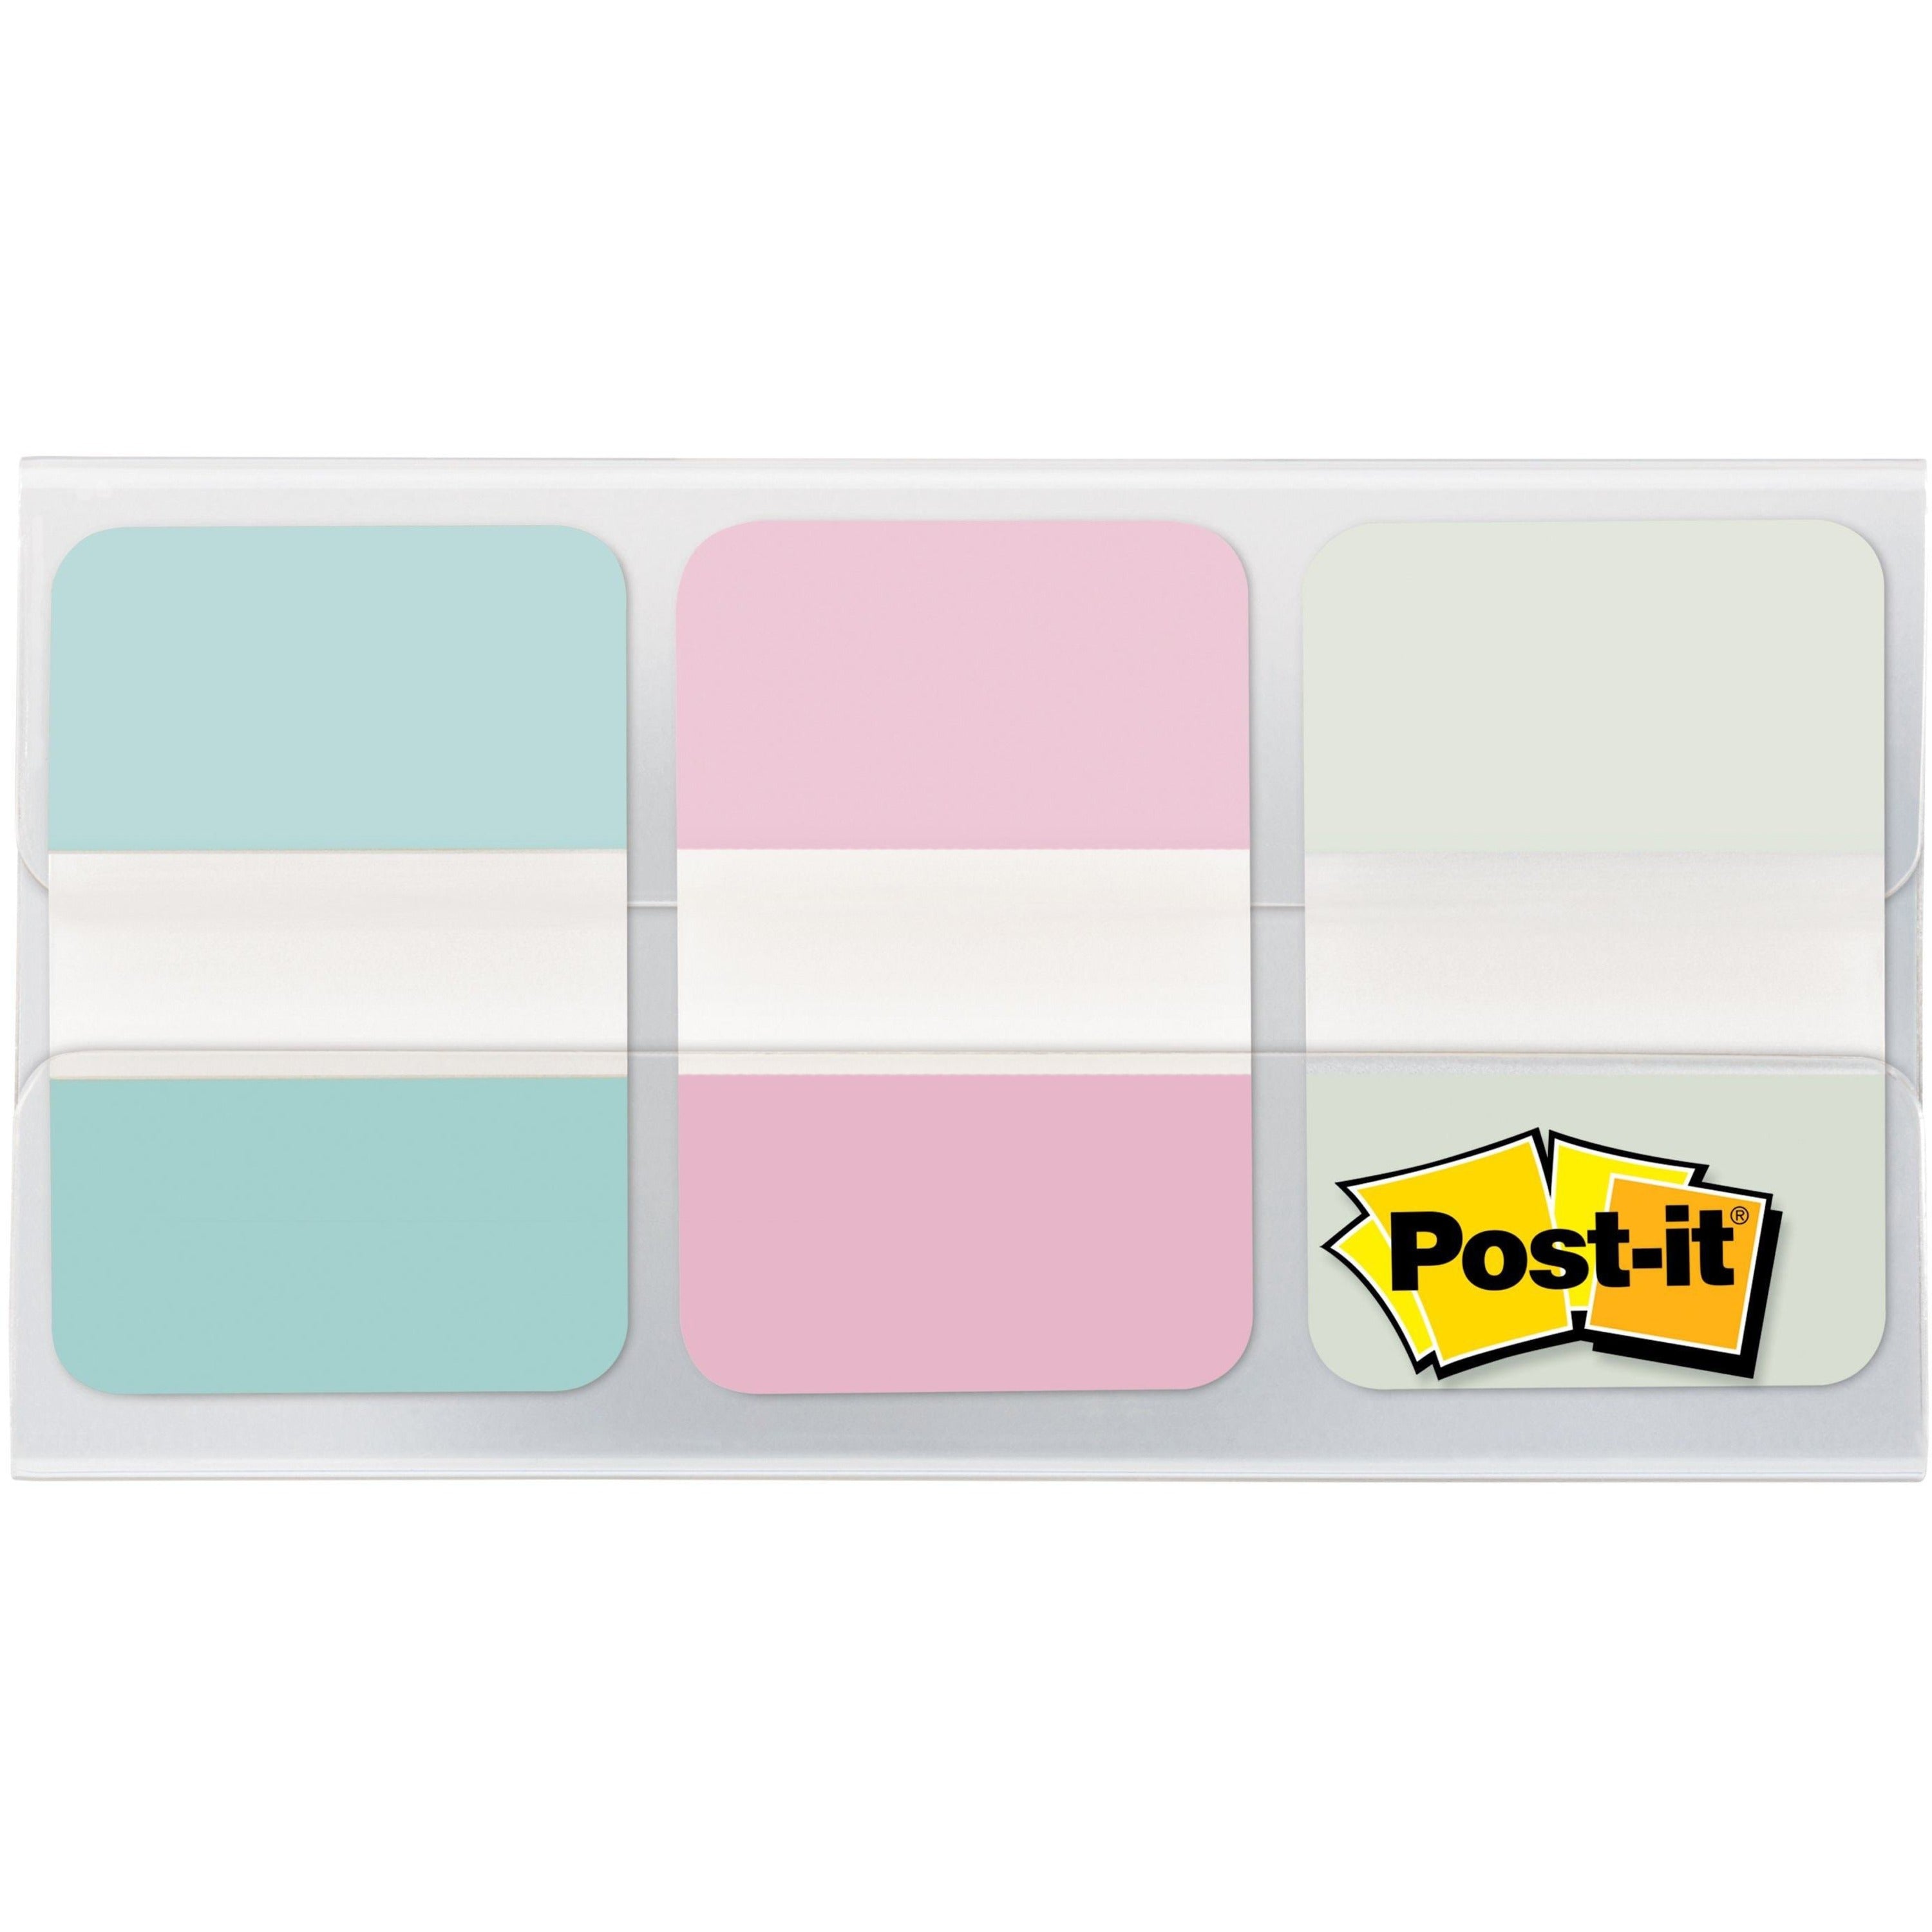 post-it-durable-tabs-12-tabs-set-1-tab-height-x-150-tab-width-blue-pink-green-tabs-removable-36-pack_mmm686grdnt - 1